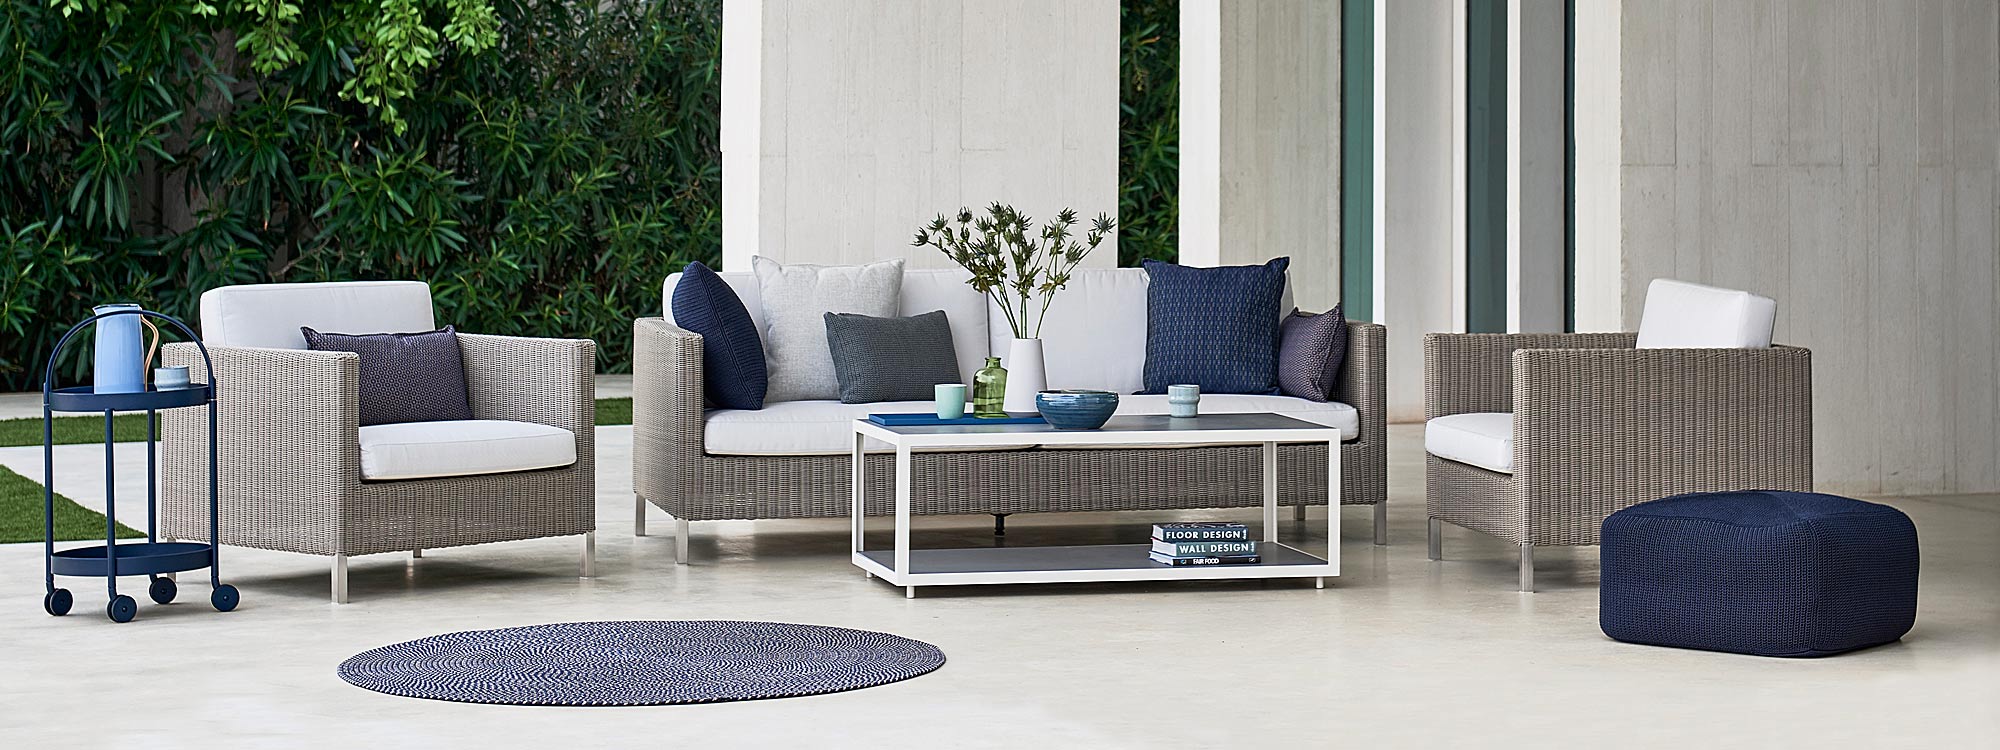 Image of Cane-line Connect 3 seat garden sofa and lounge chairs in taupe rattan weave with white cushions and white Level outdoor coffee tables